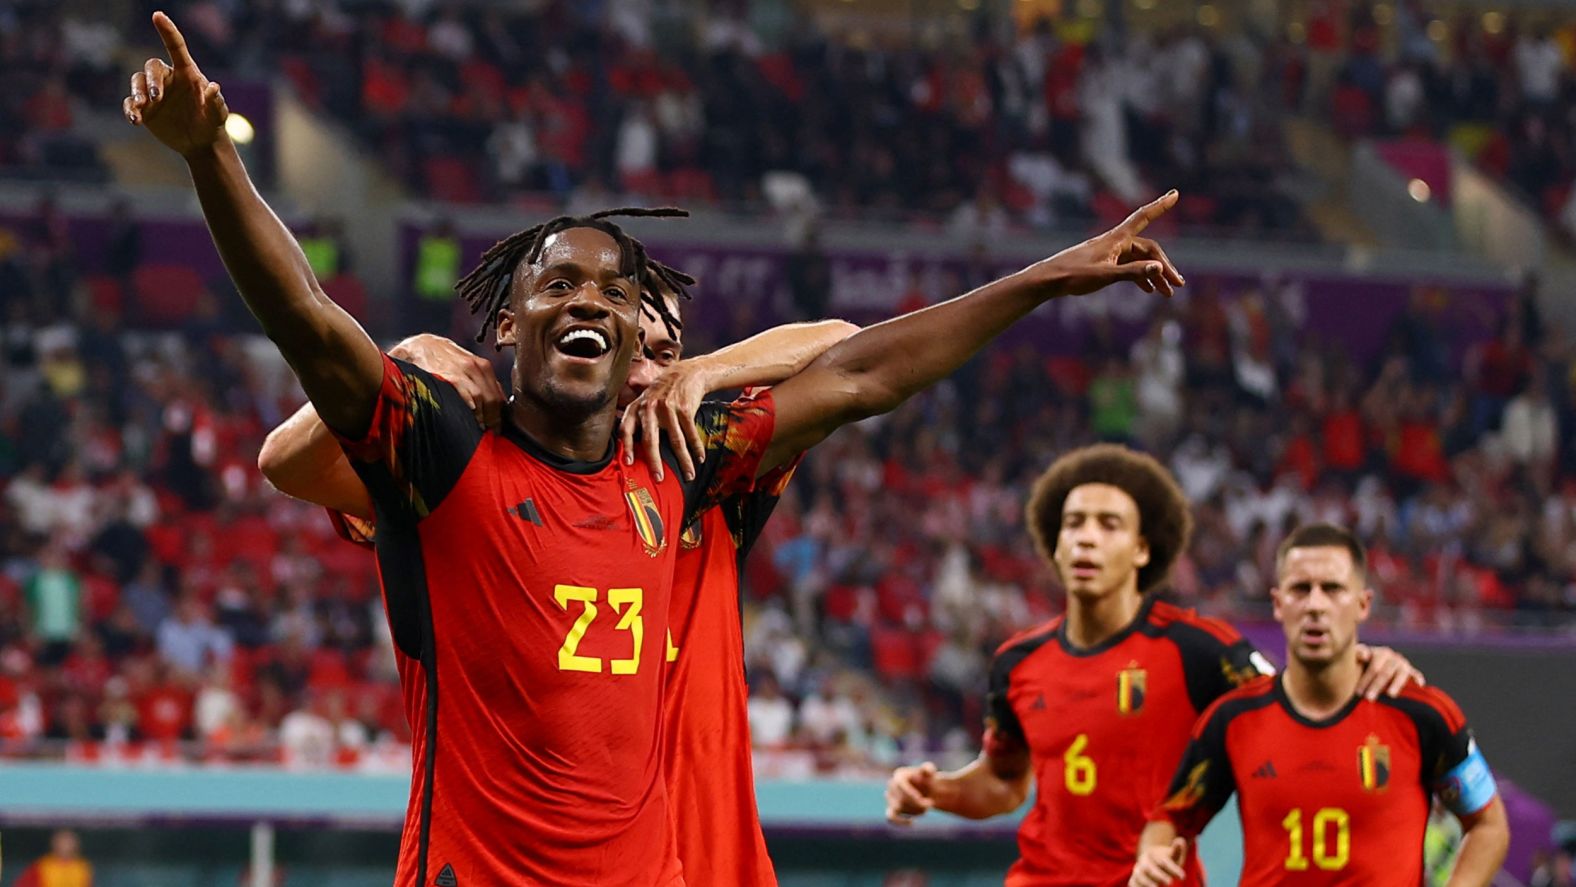 Michy Batshuayi celebrates after giving Belgium a 1-0 lead over Canada in their World Cup opener on November 23. That ended up being the only goal of the match.